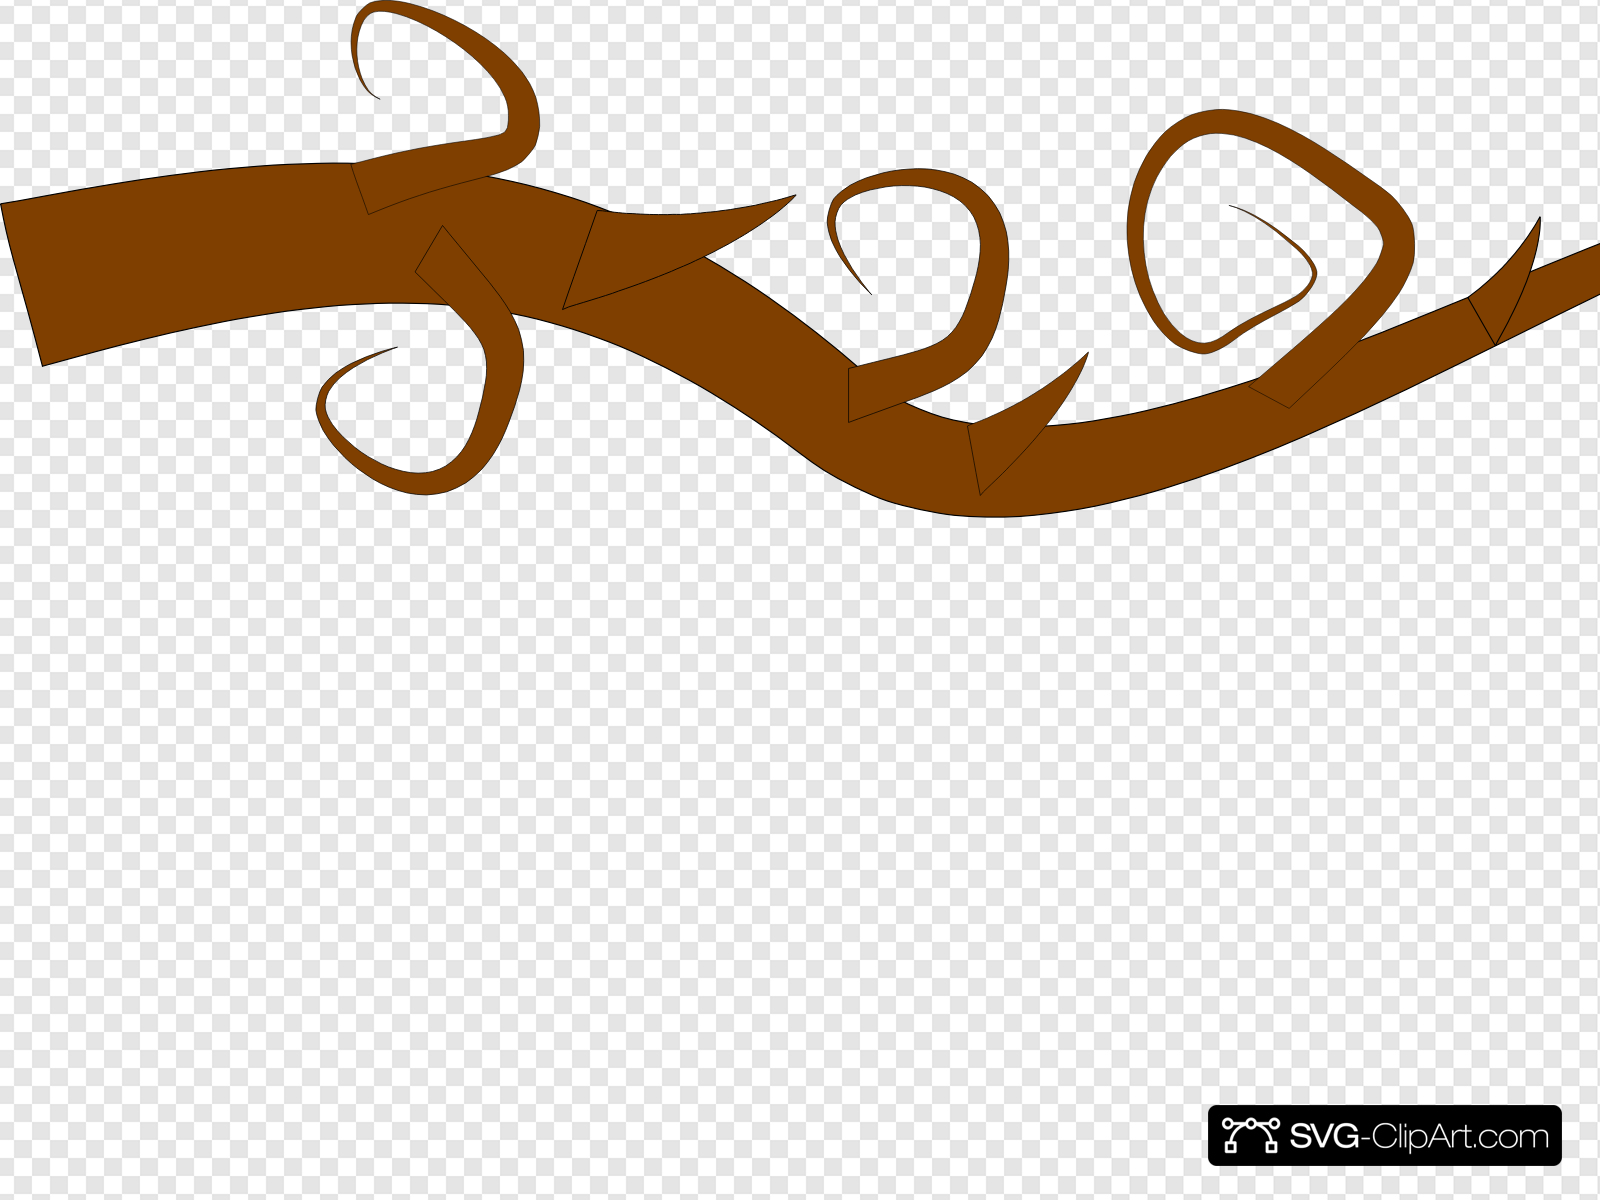 Brown Tree Branch Clip art, Icon and SVG.